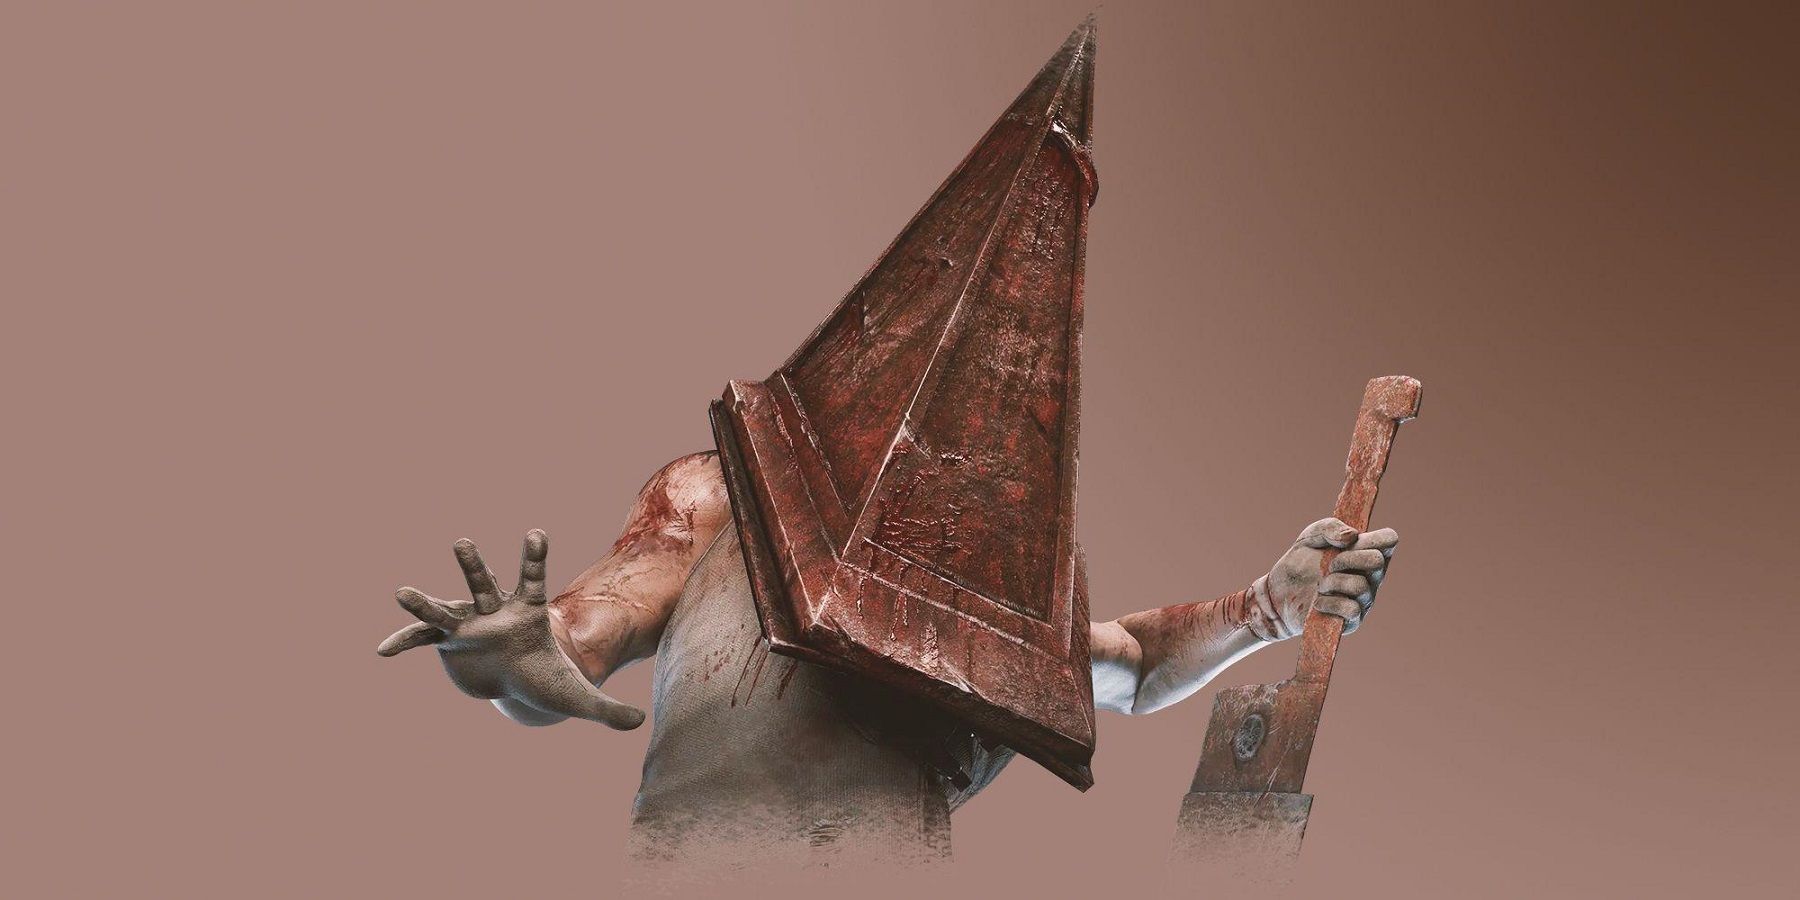 Pyramid Head creator weighs in on his creation appearing in Dead by  Daylight - Niche Gamer